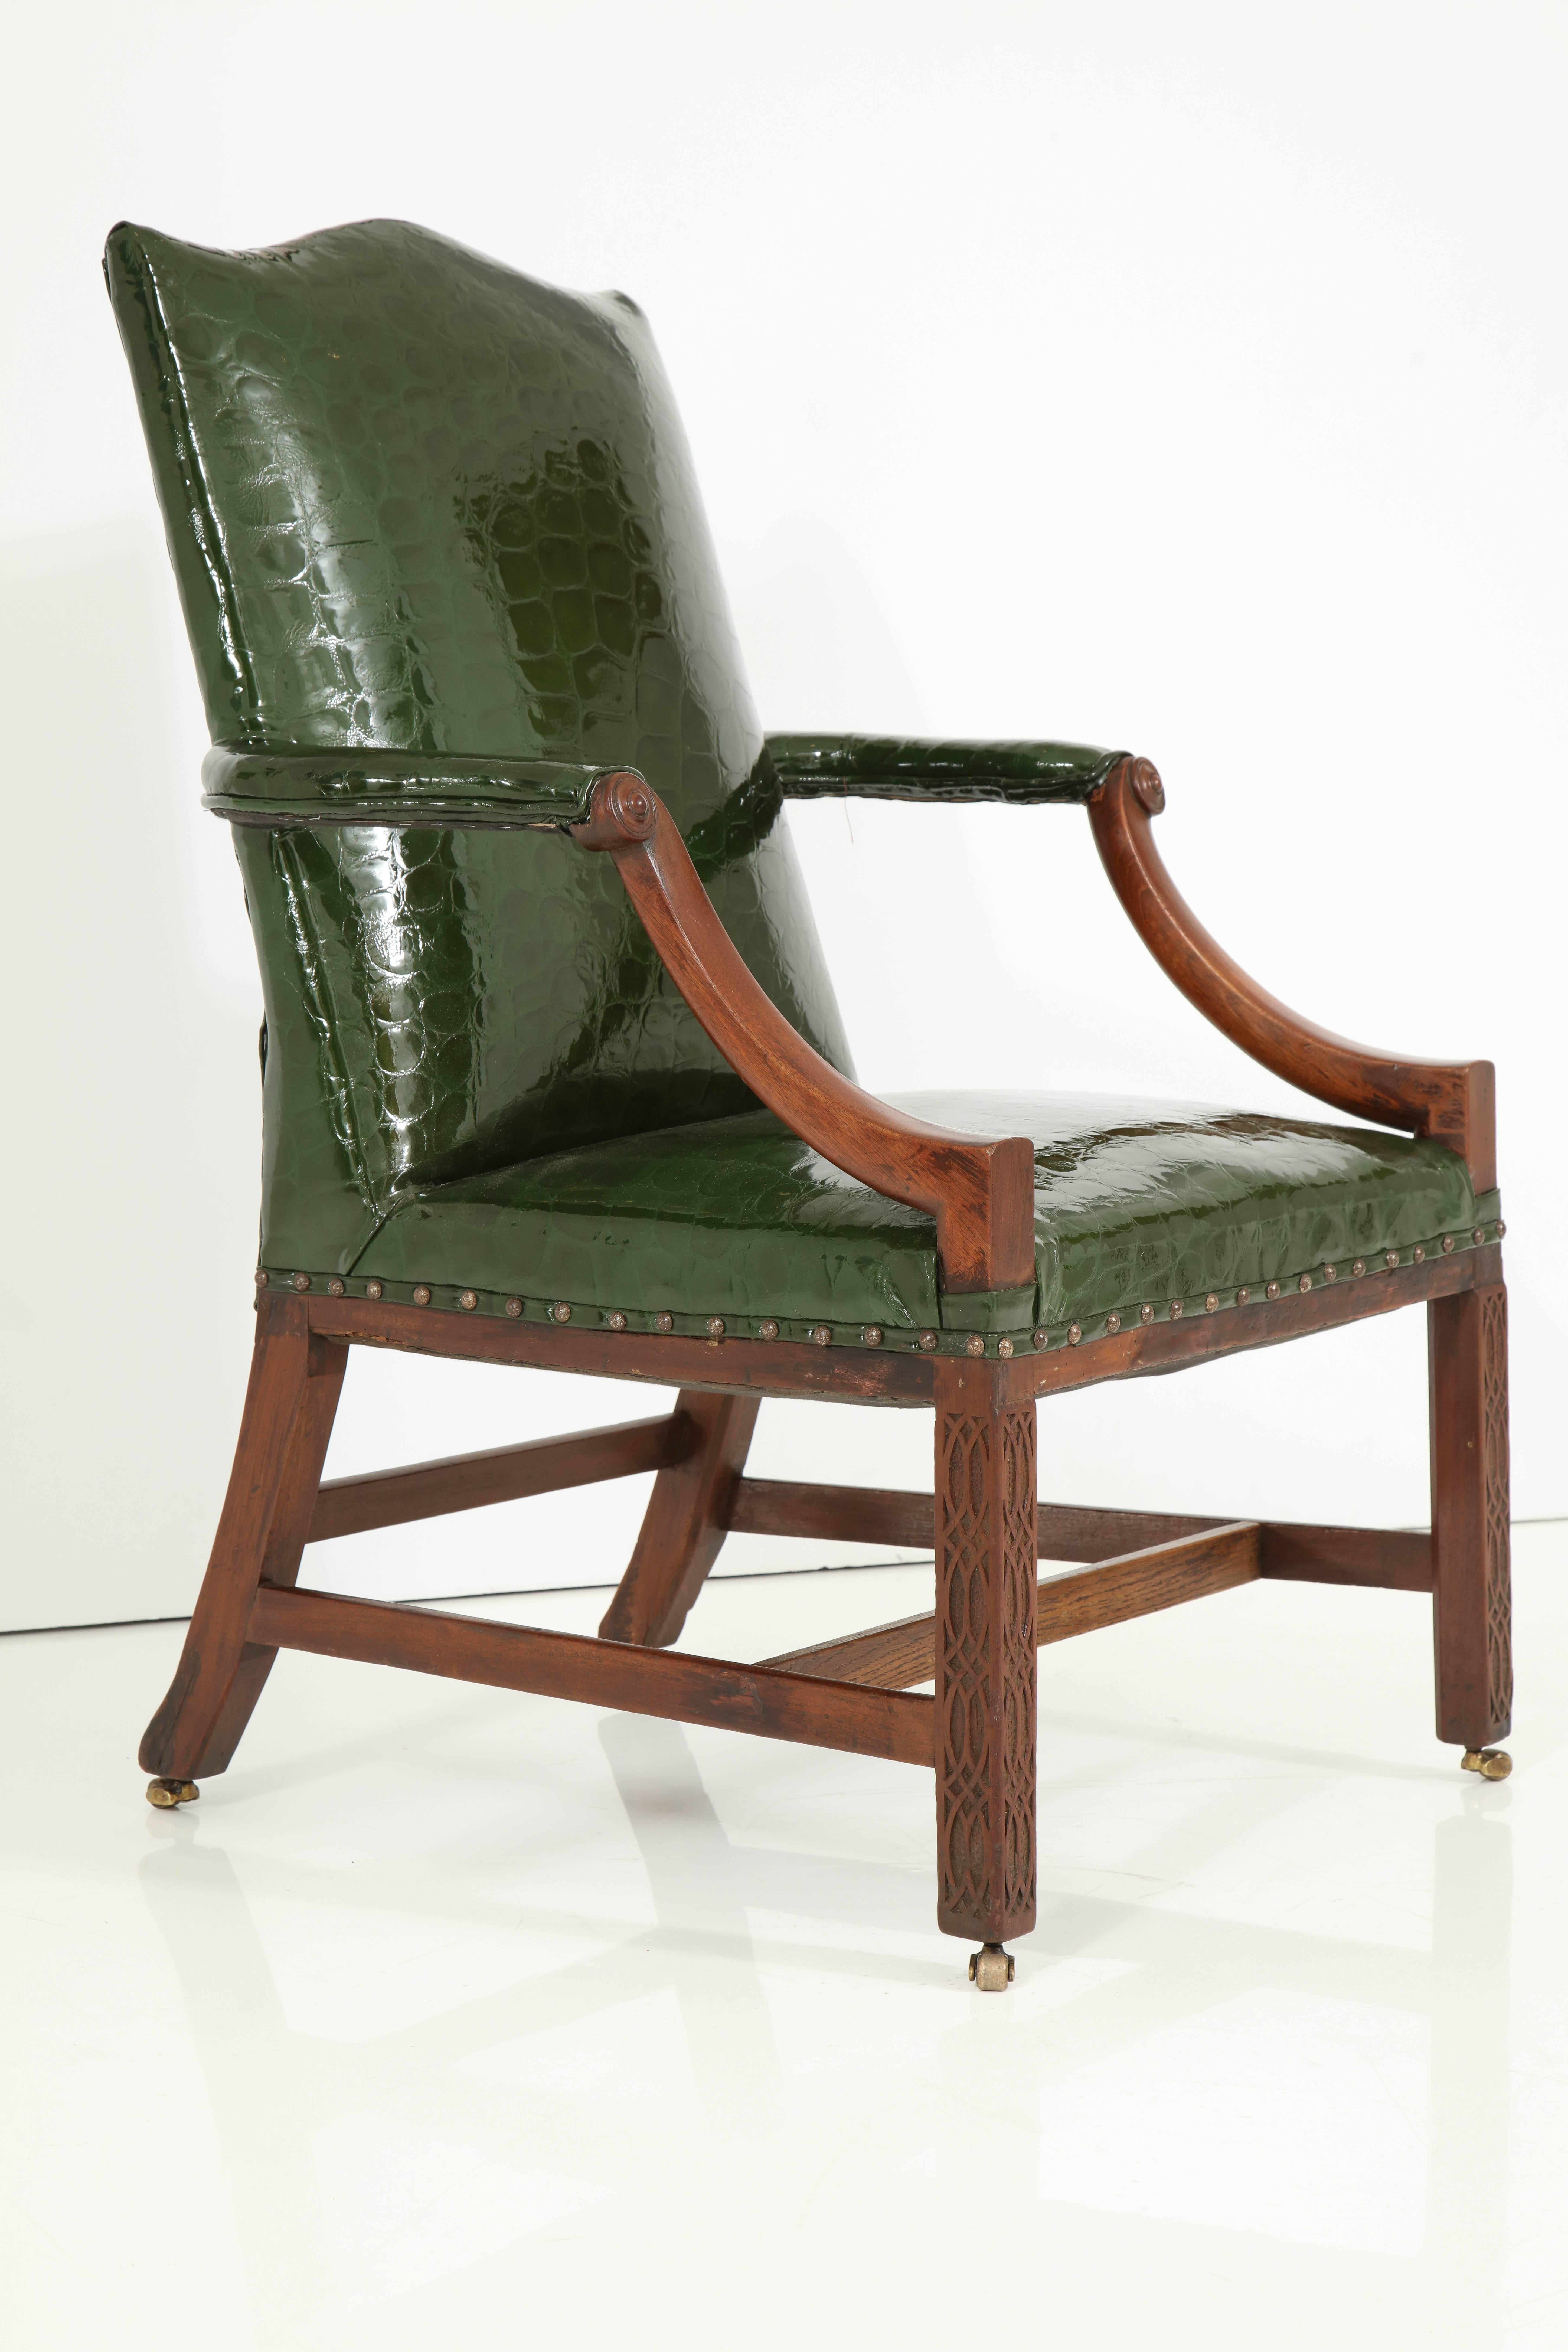 Old meets new in this handsome English mahogany armchair. Beautifully crafted, this comfortable chair features lovely, but subtle details including gracious, slightly curved arms with small carved design at end of armrest and reticulated carving on